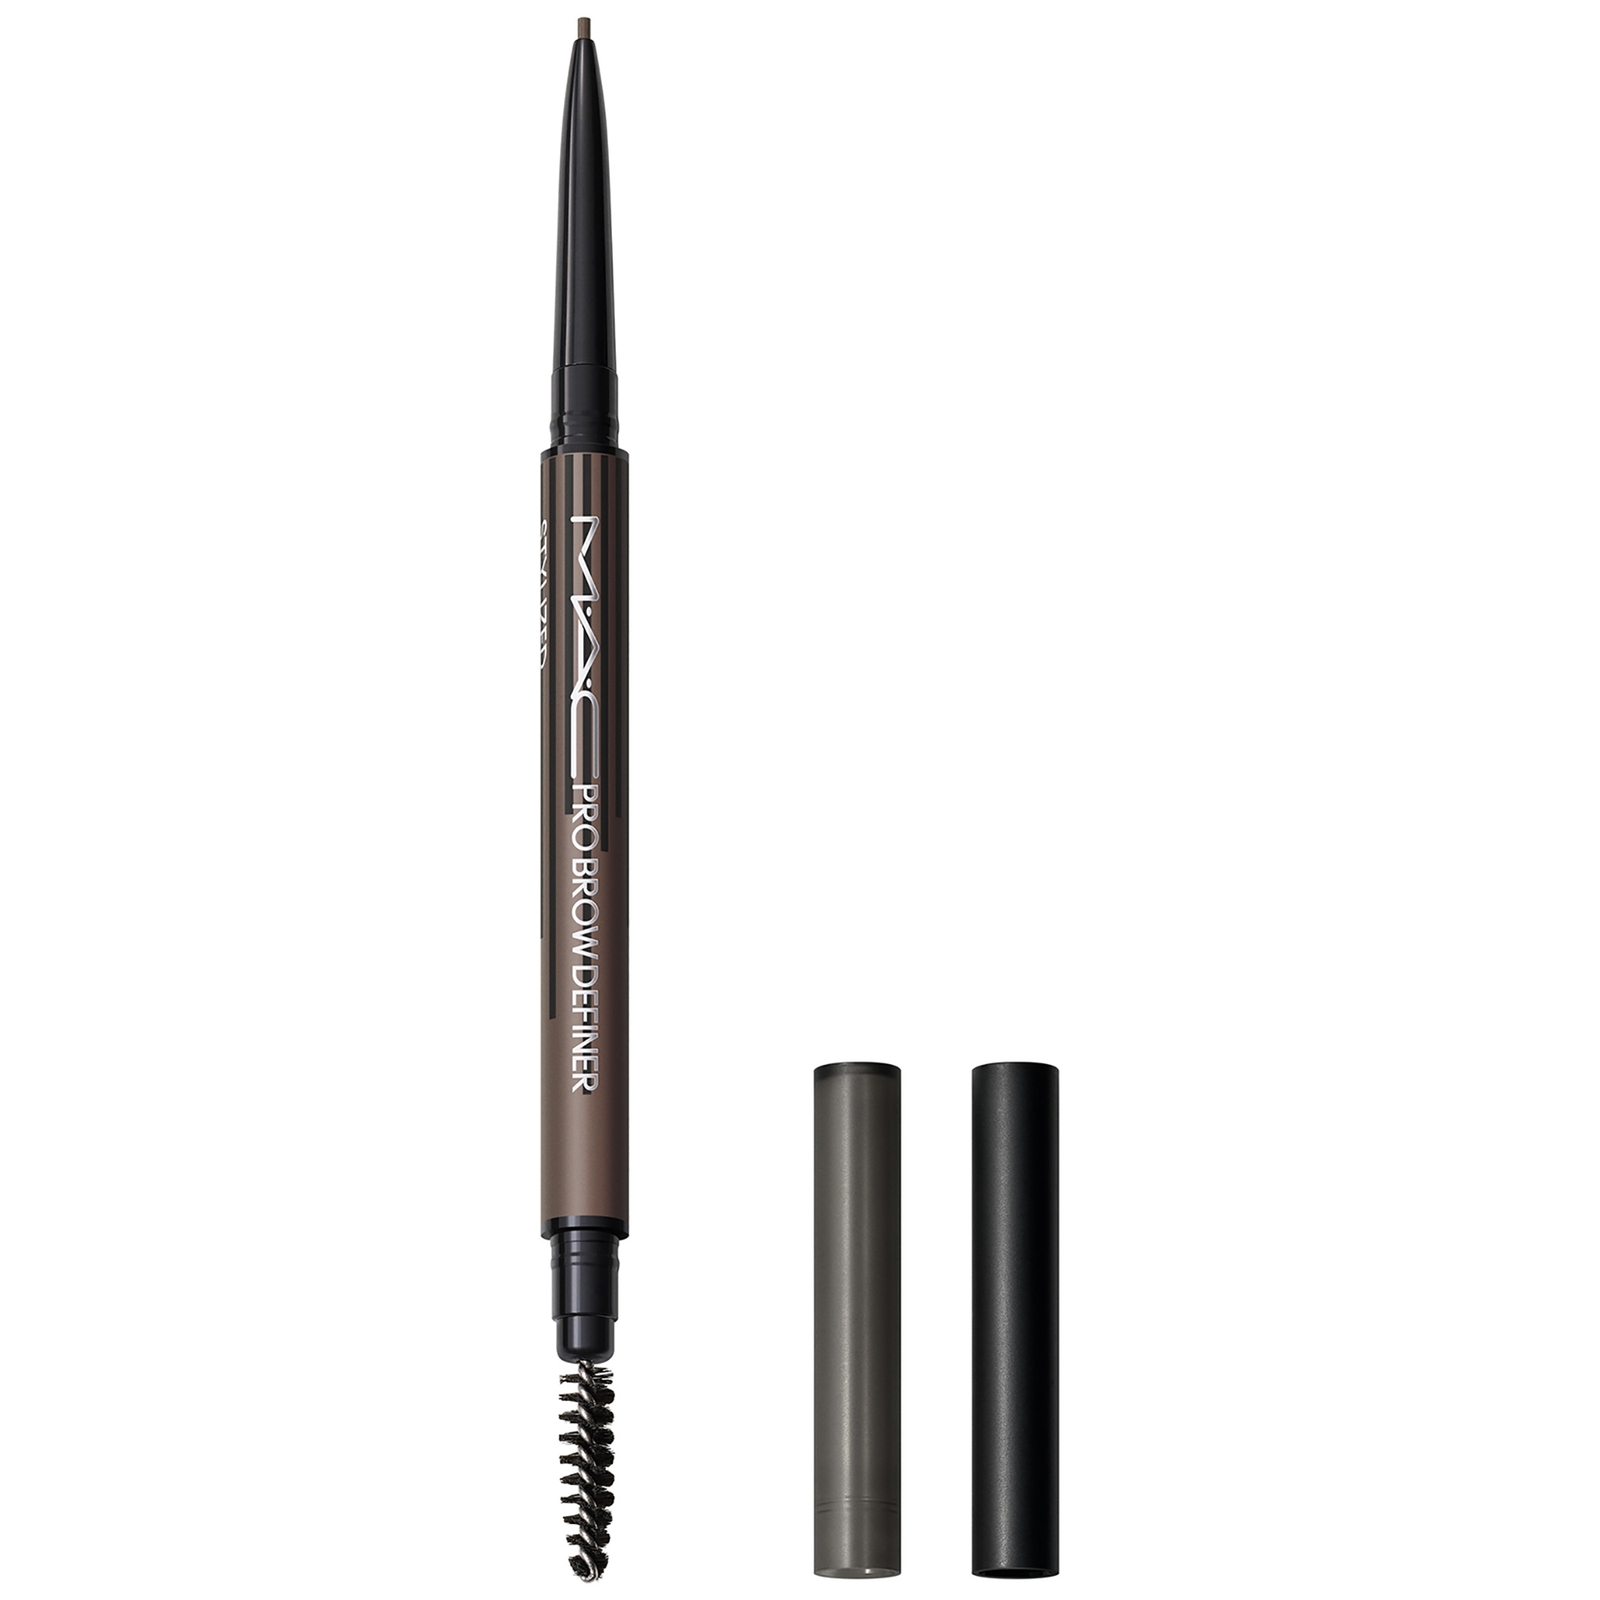 PRO BROW DEFINER 1MM-TIP BROW PENCIL 5G (VARIOUS SHADES) - STYLIZED